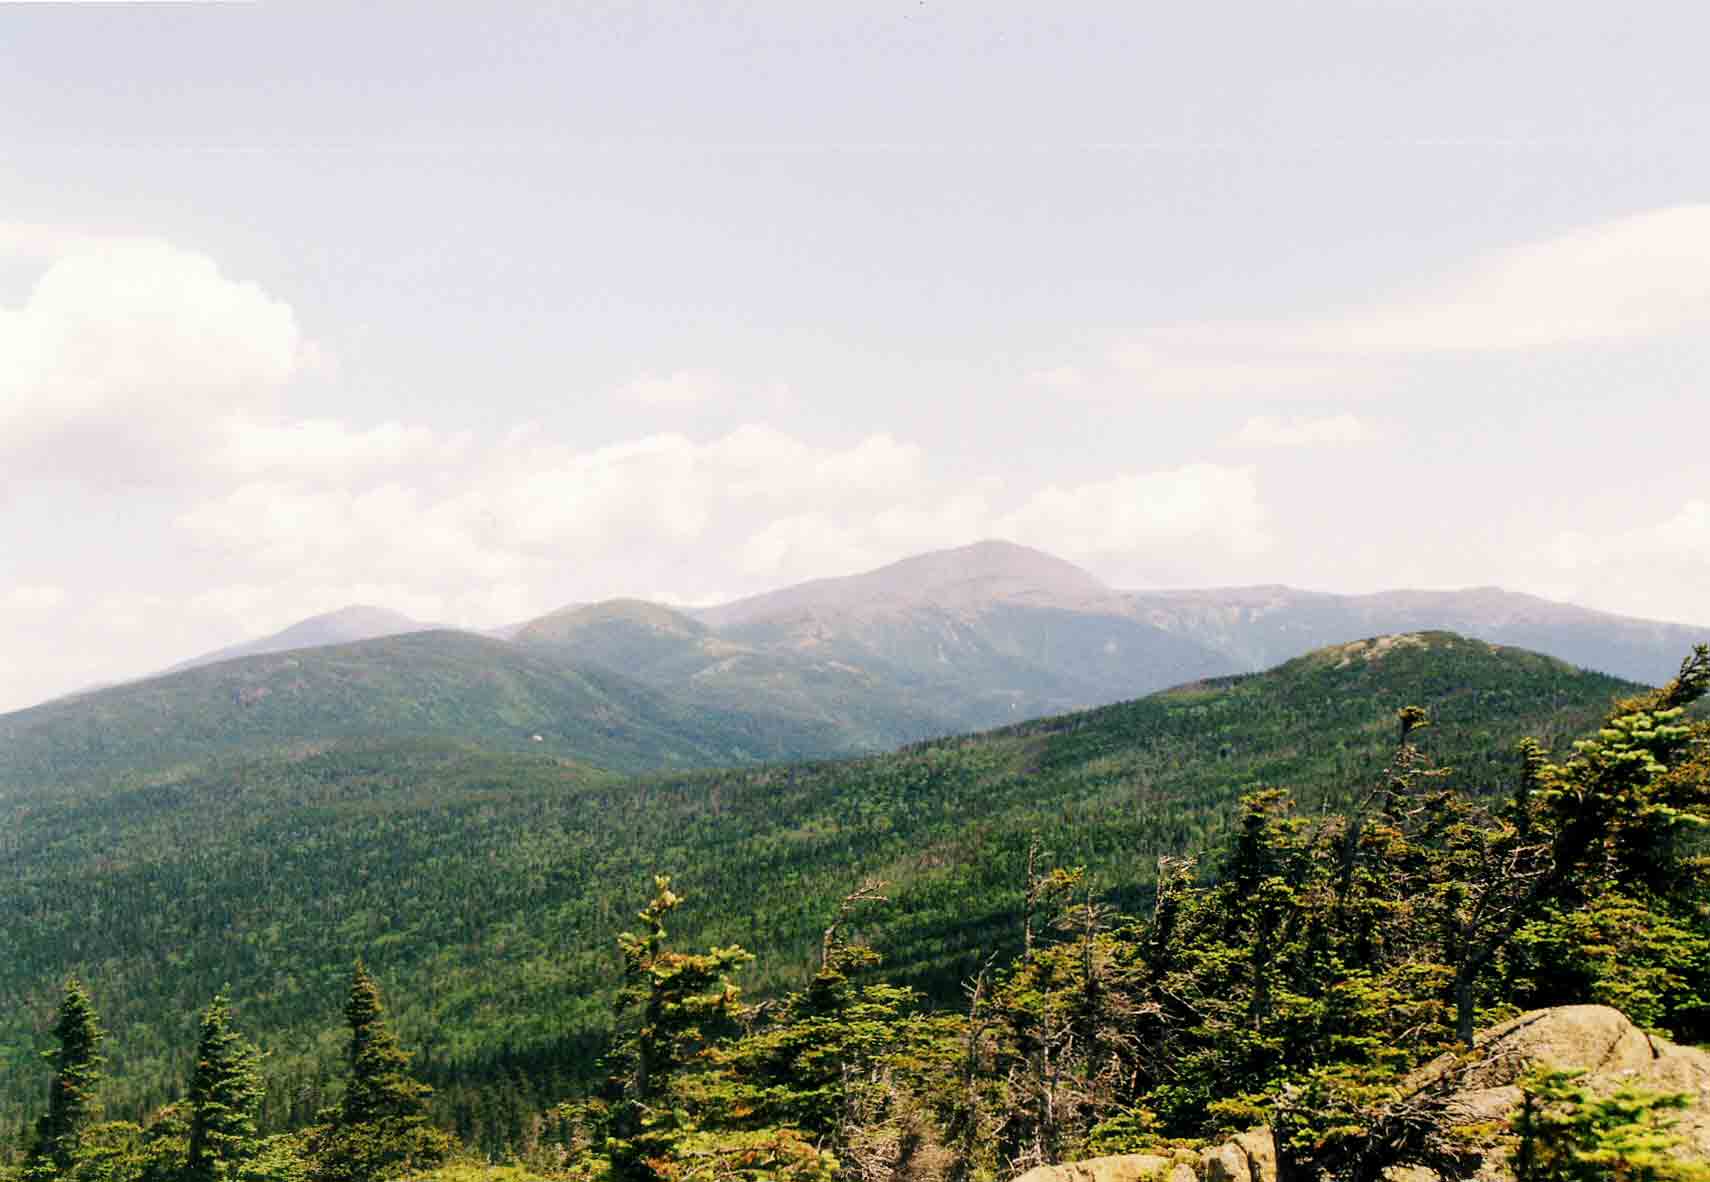 mm 22.7 - Looking north from the summit of Mt. Webster along the Presidental Range to Mt. Washington. The peak on the left in the far distance is Mt. Jefferson. Courtesy dlcul@conncoll.edu